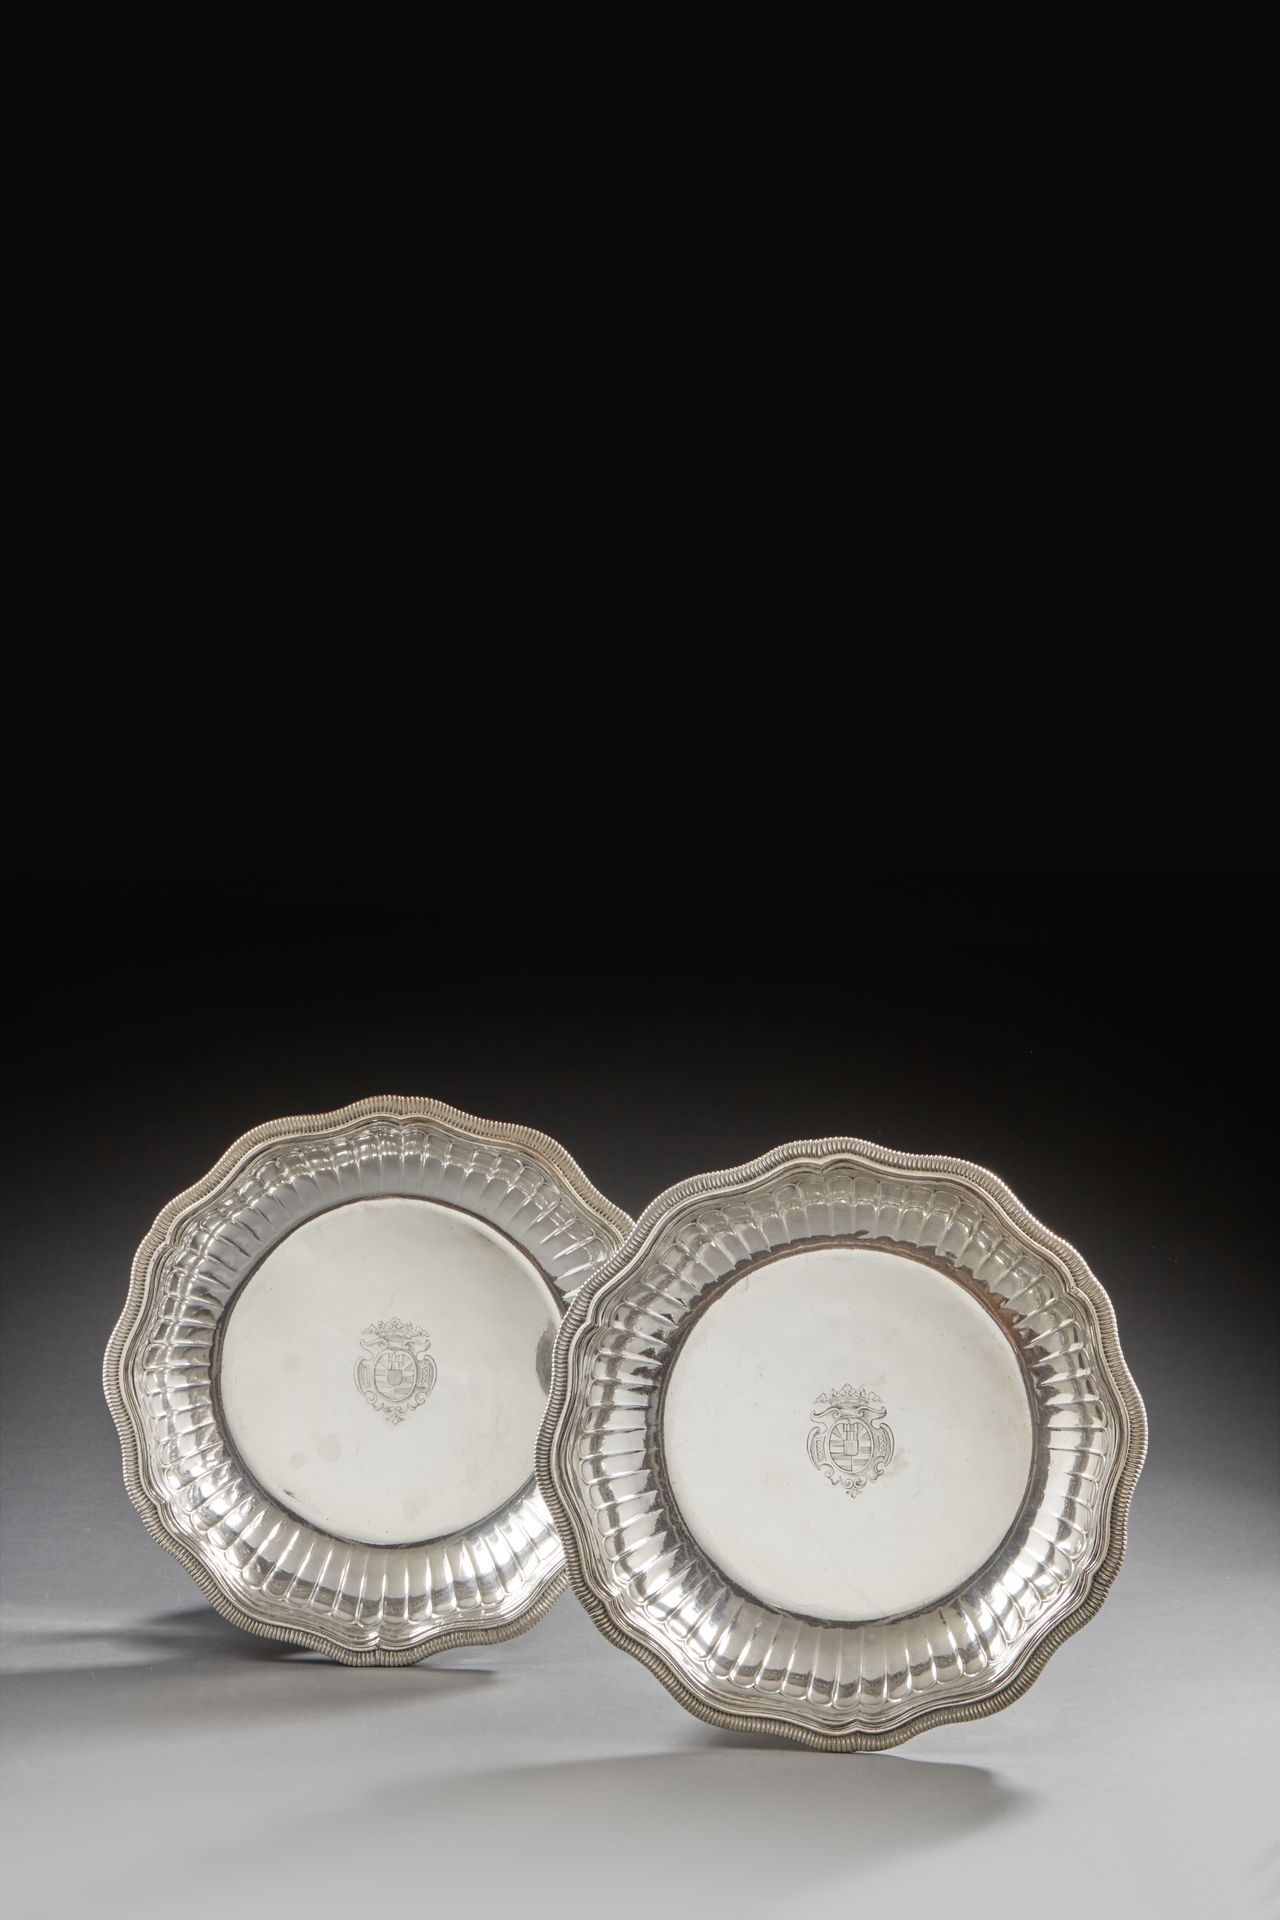 Null PARIS 1727 - 1728
A pair of silver bowls, poly-lobed model moulded with gad&hellip;